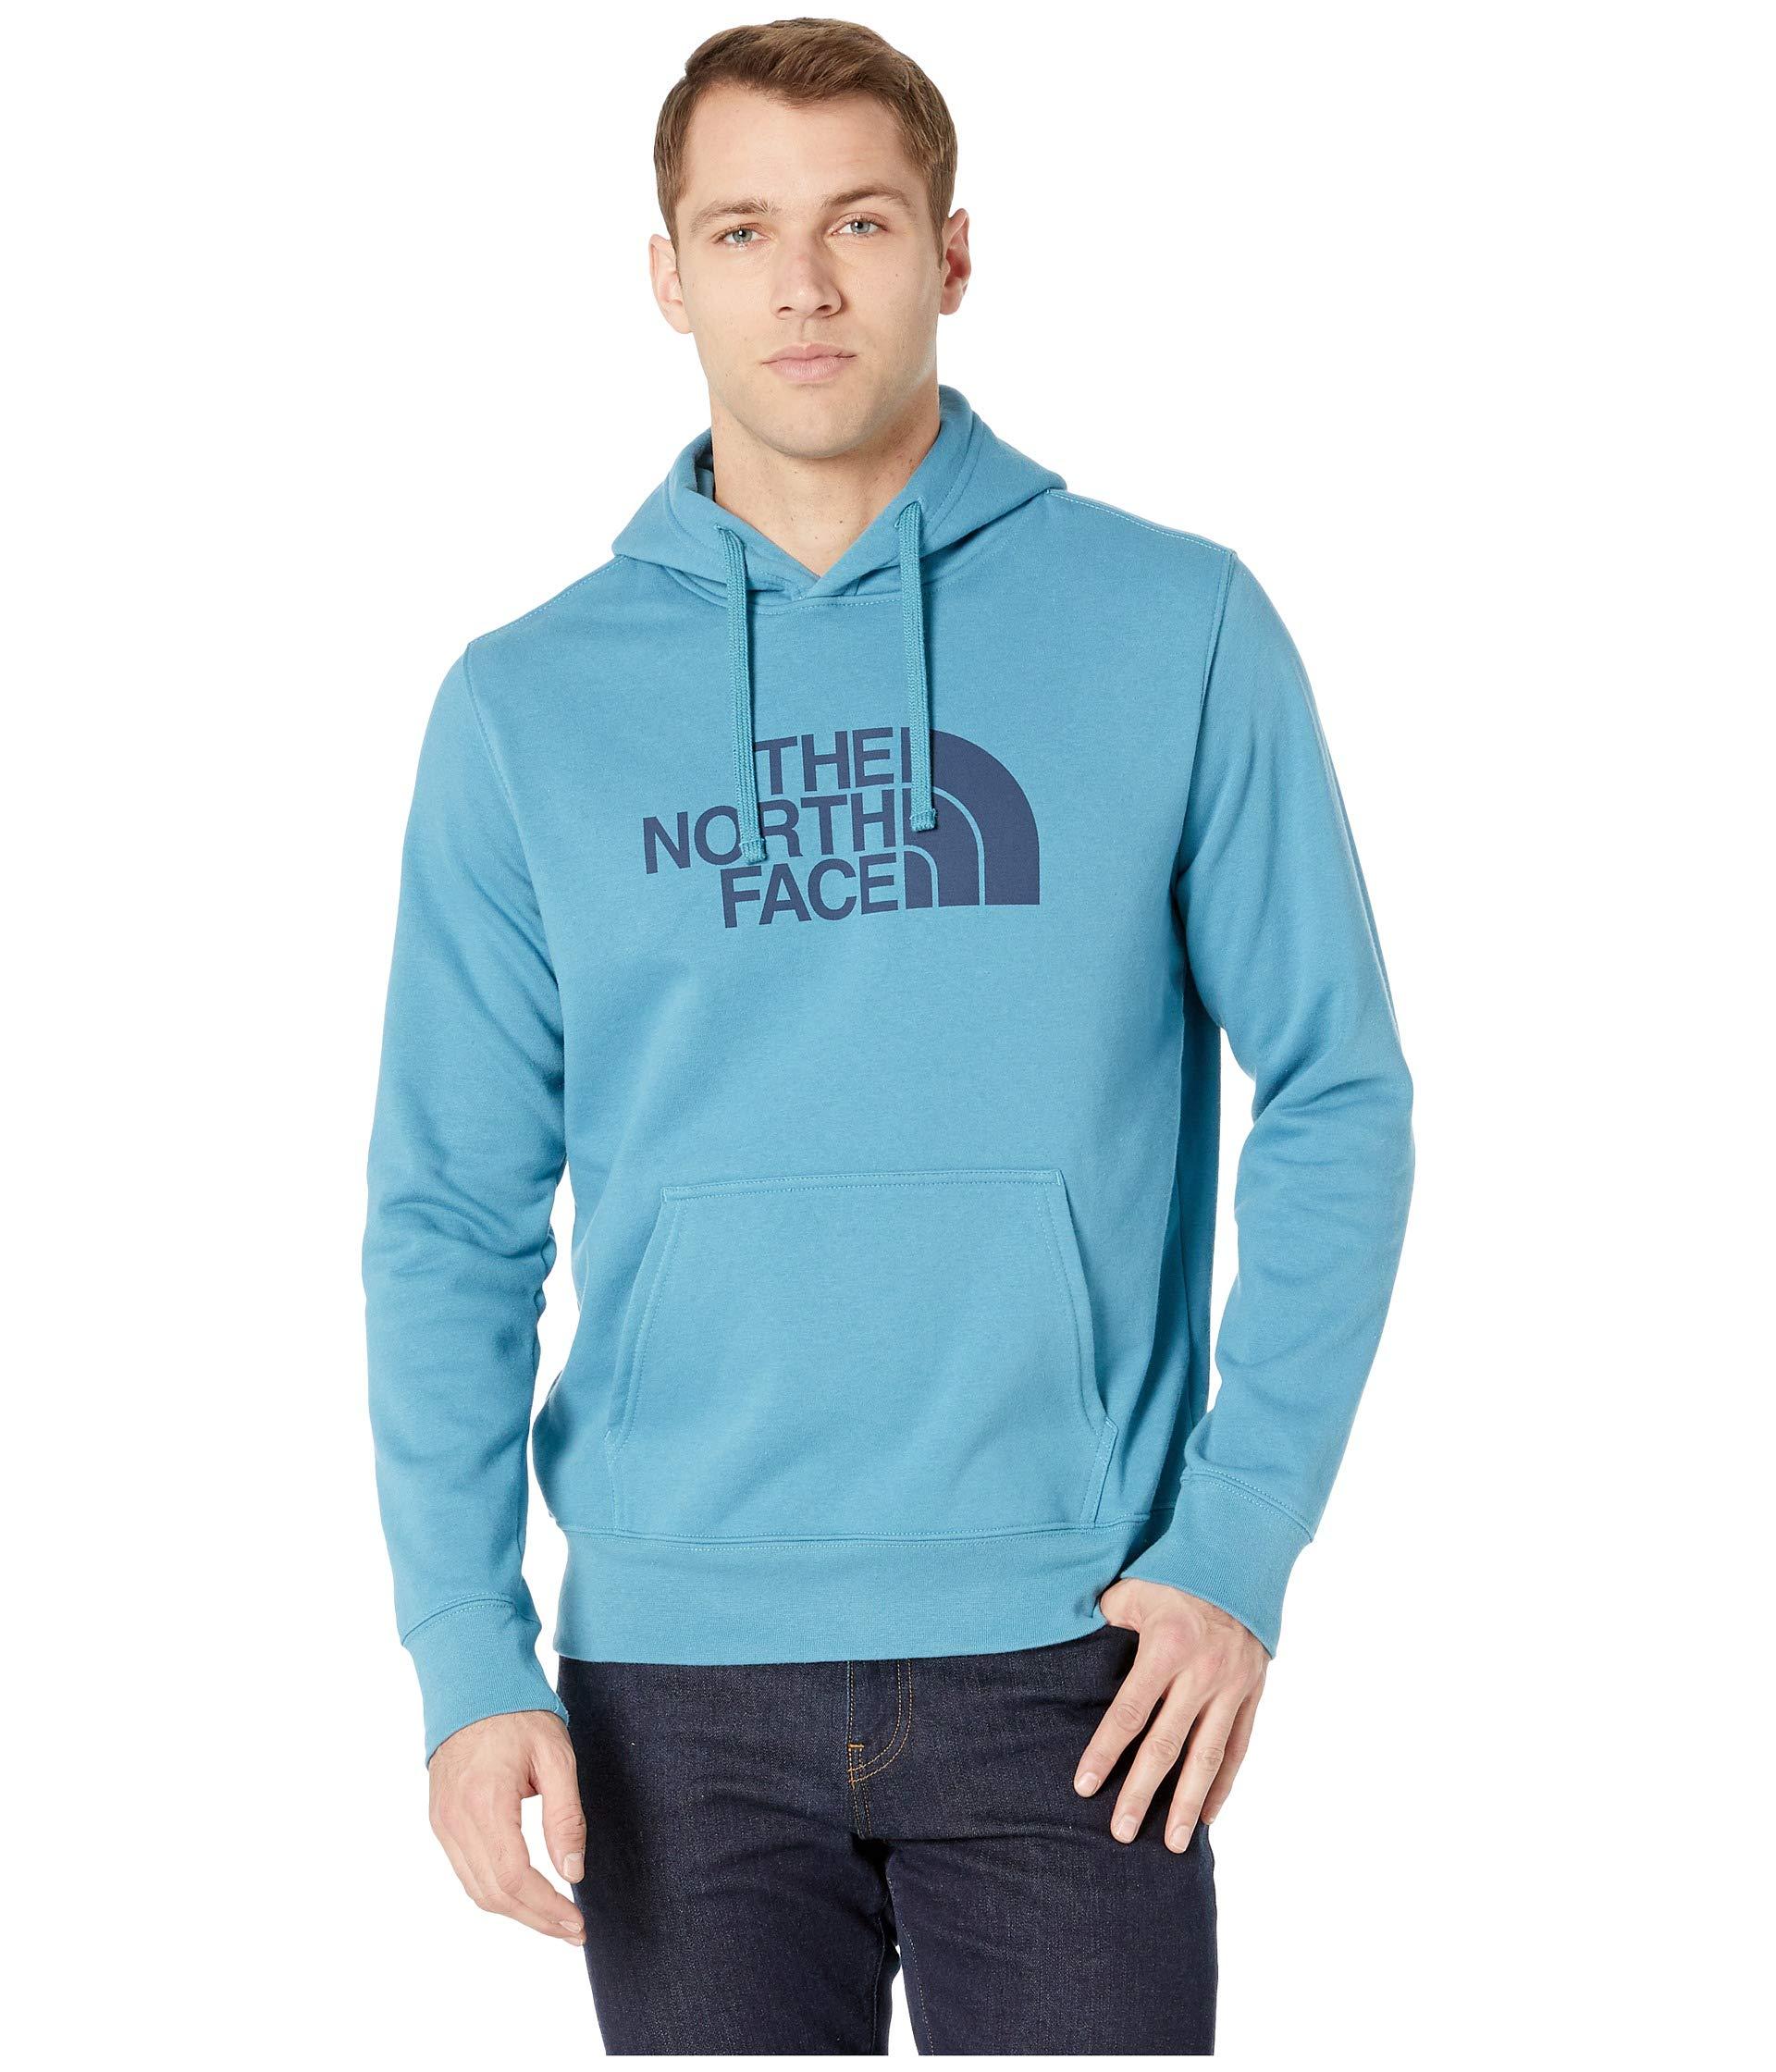 Lyst - The North Face Half Dome Pullover Hoodie (storm Blue/urban Navy) Men's Sweatshirt in Blue 